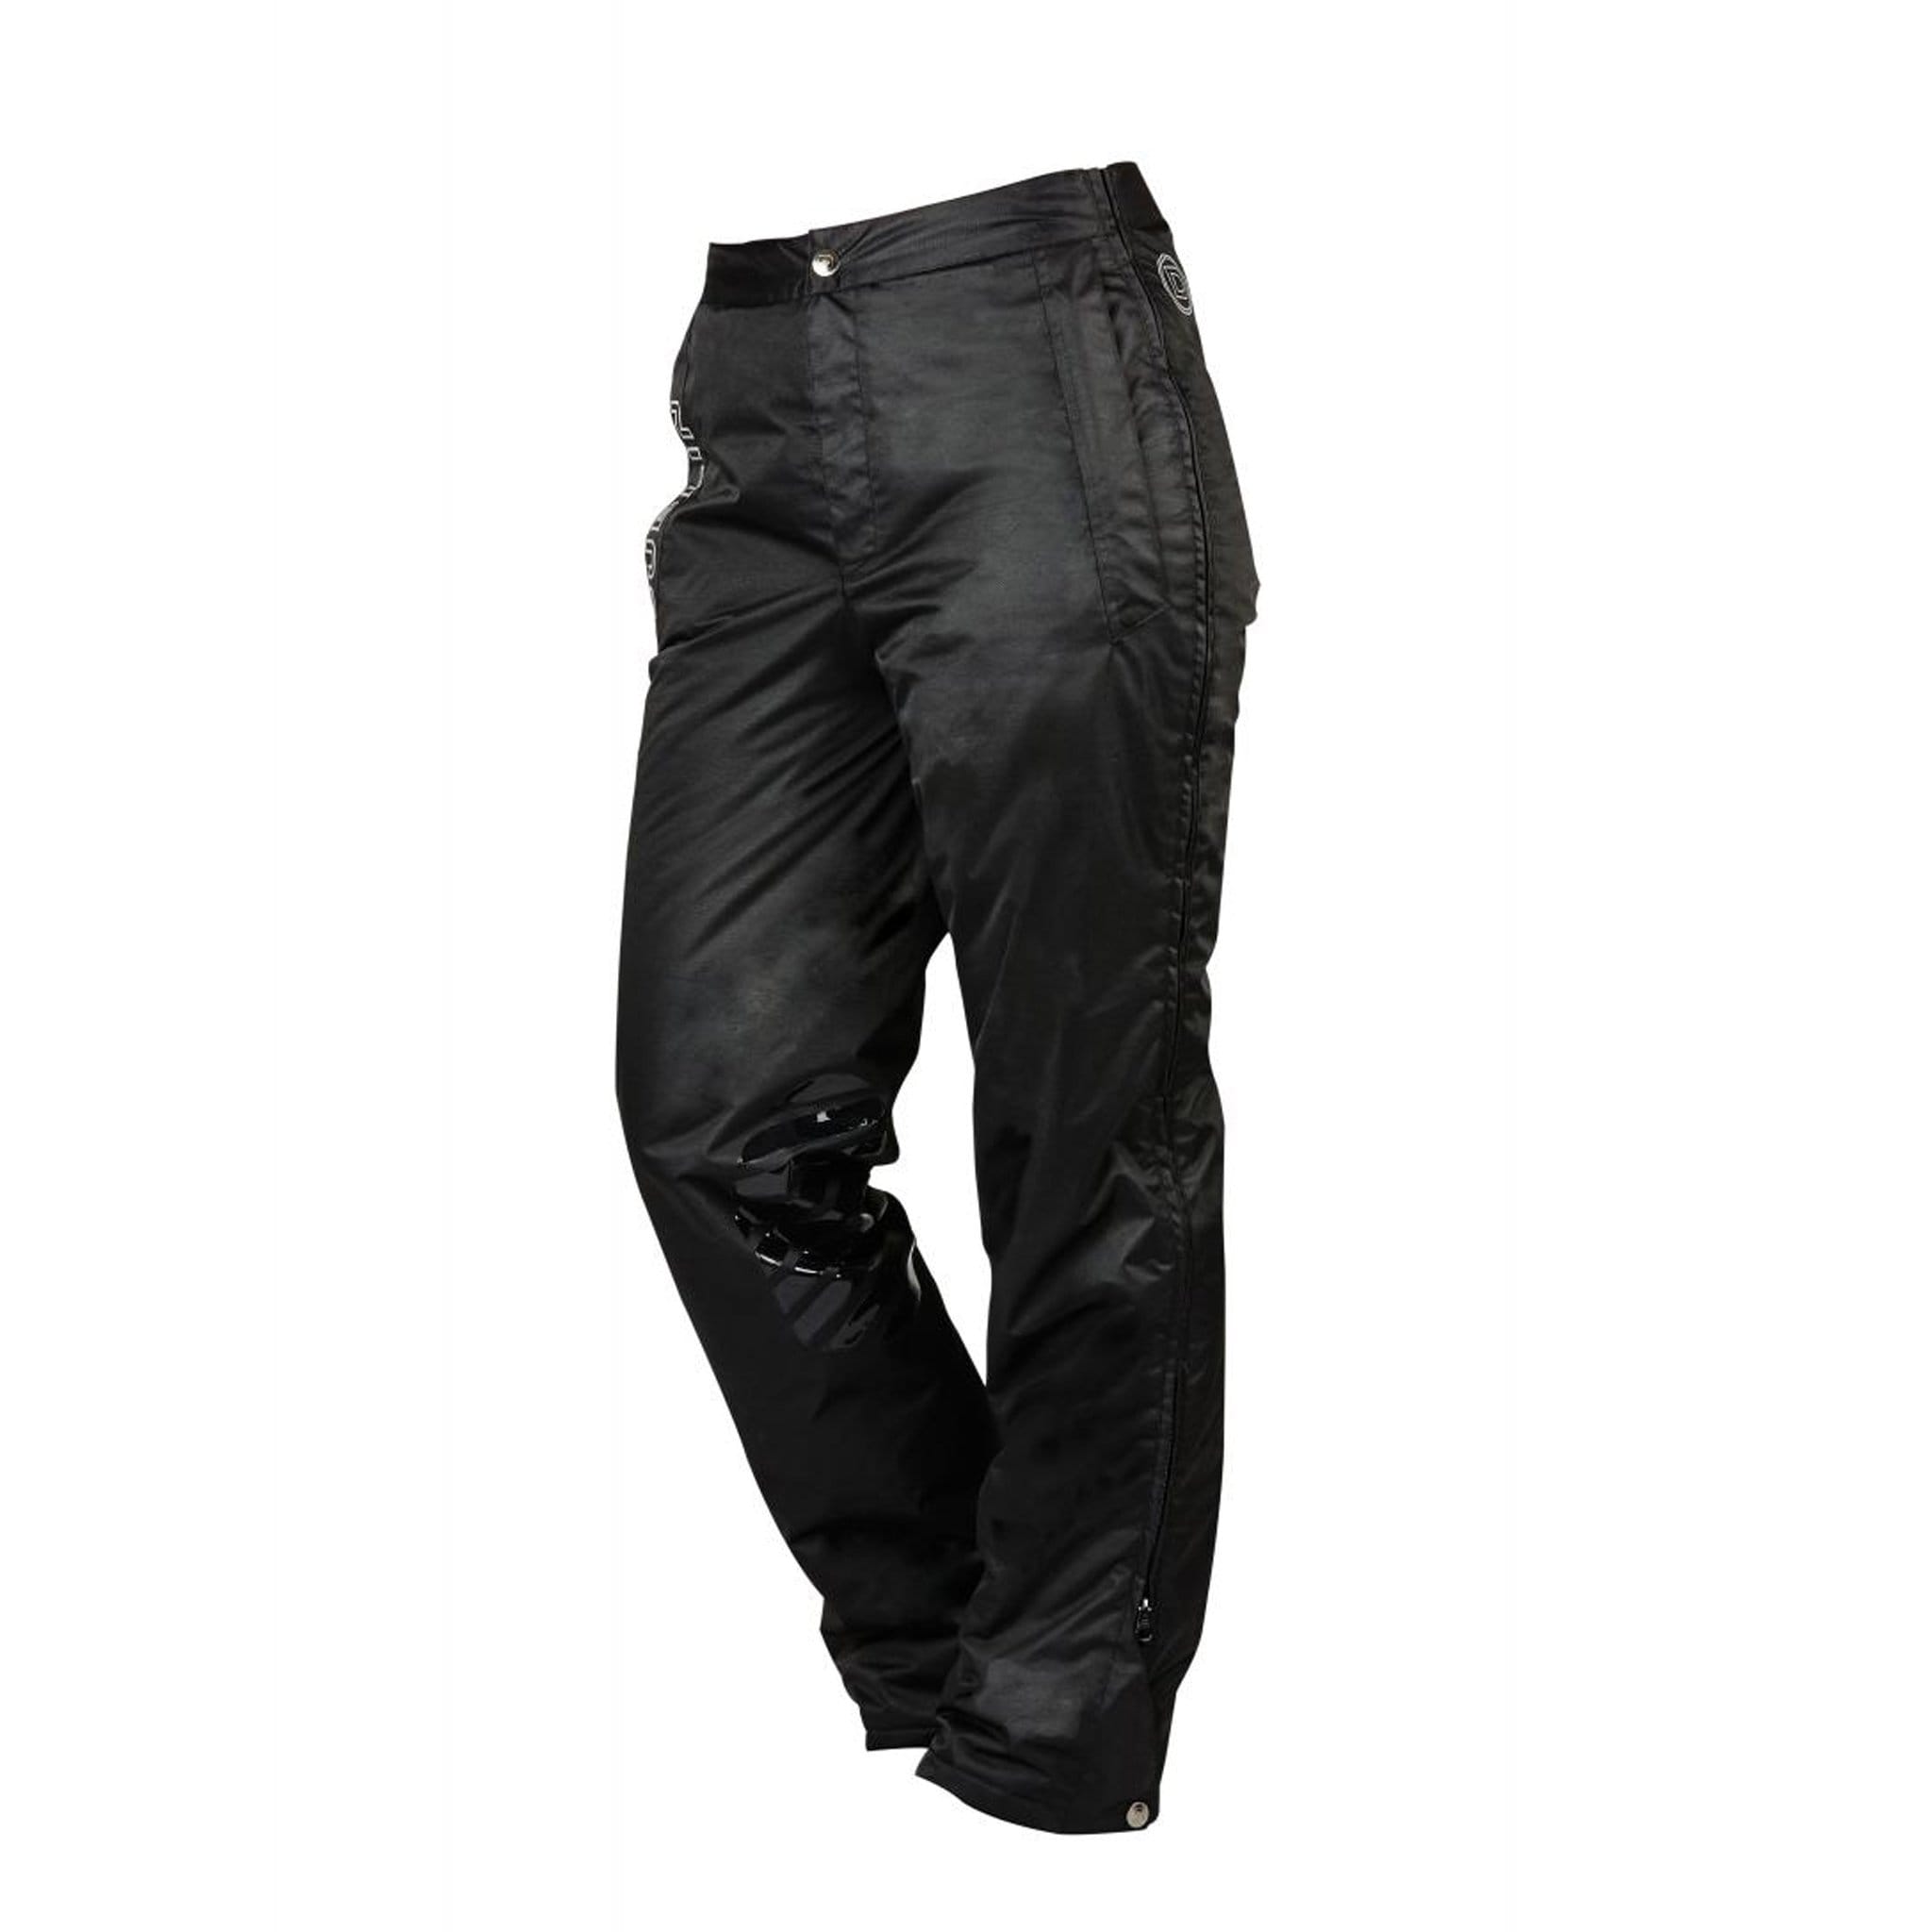 Dublin Unisex Thermal Waterproof Overtrousers